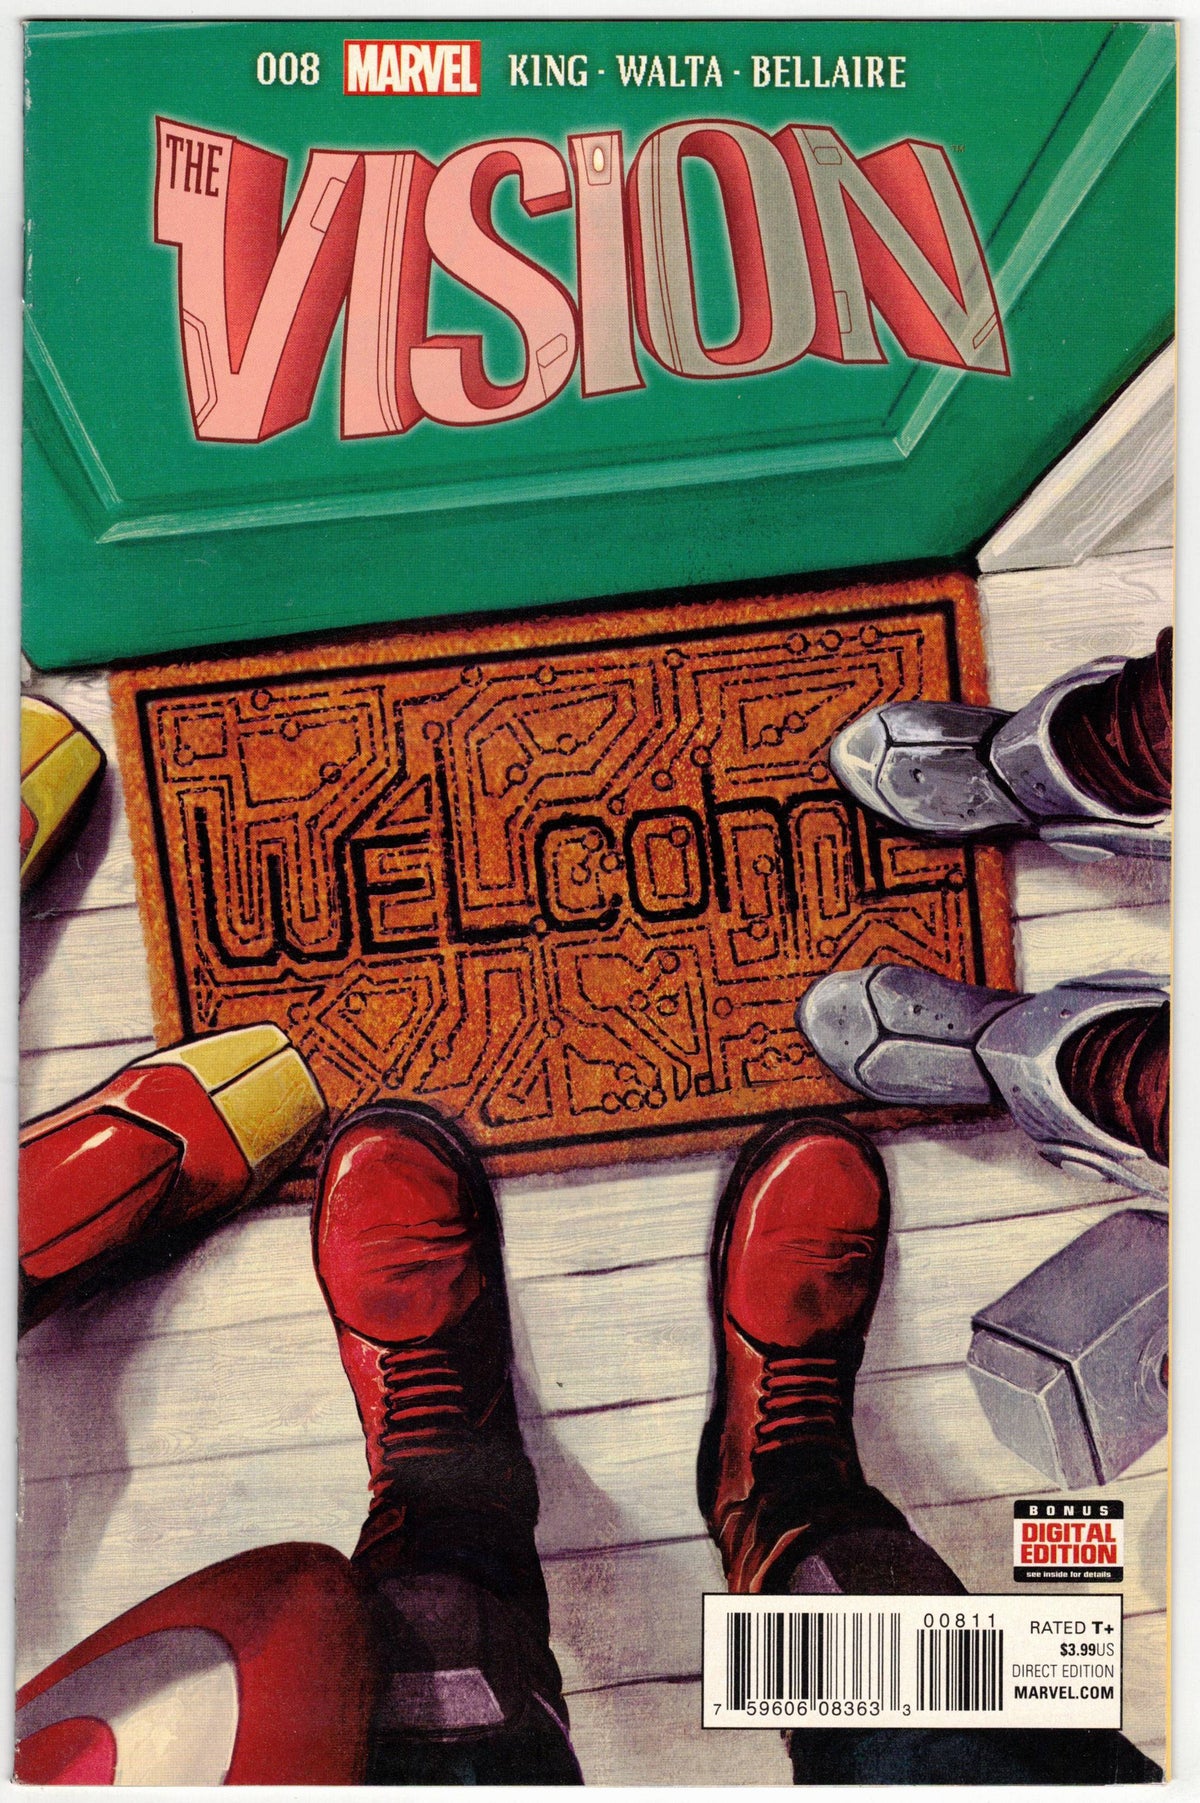 Photo of Vision, Vol. 3 (2016) Issue 8A - Very Fine - Comic sold by Stronghold Collectibles